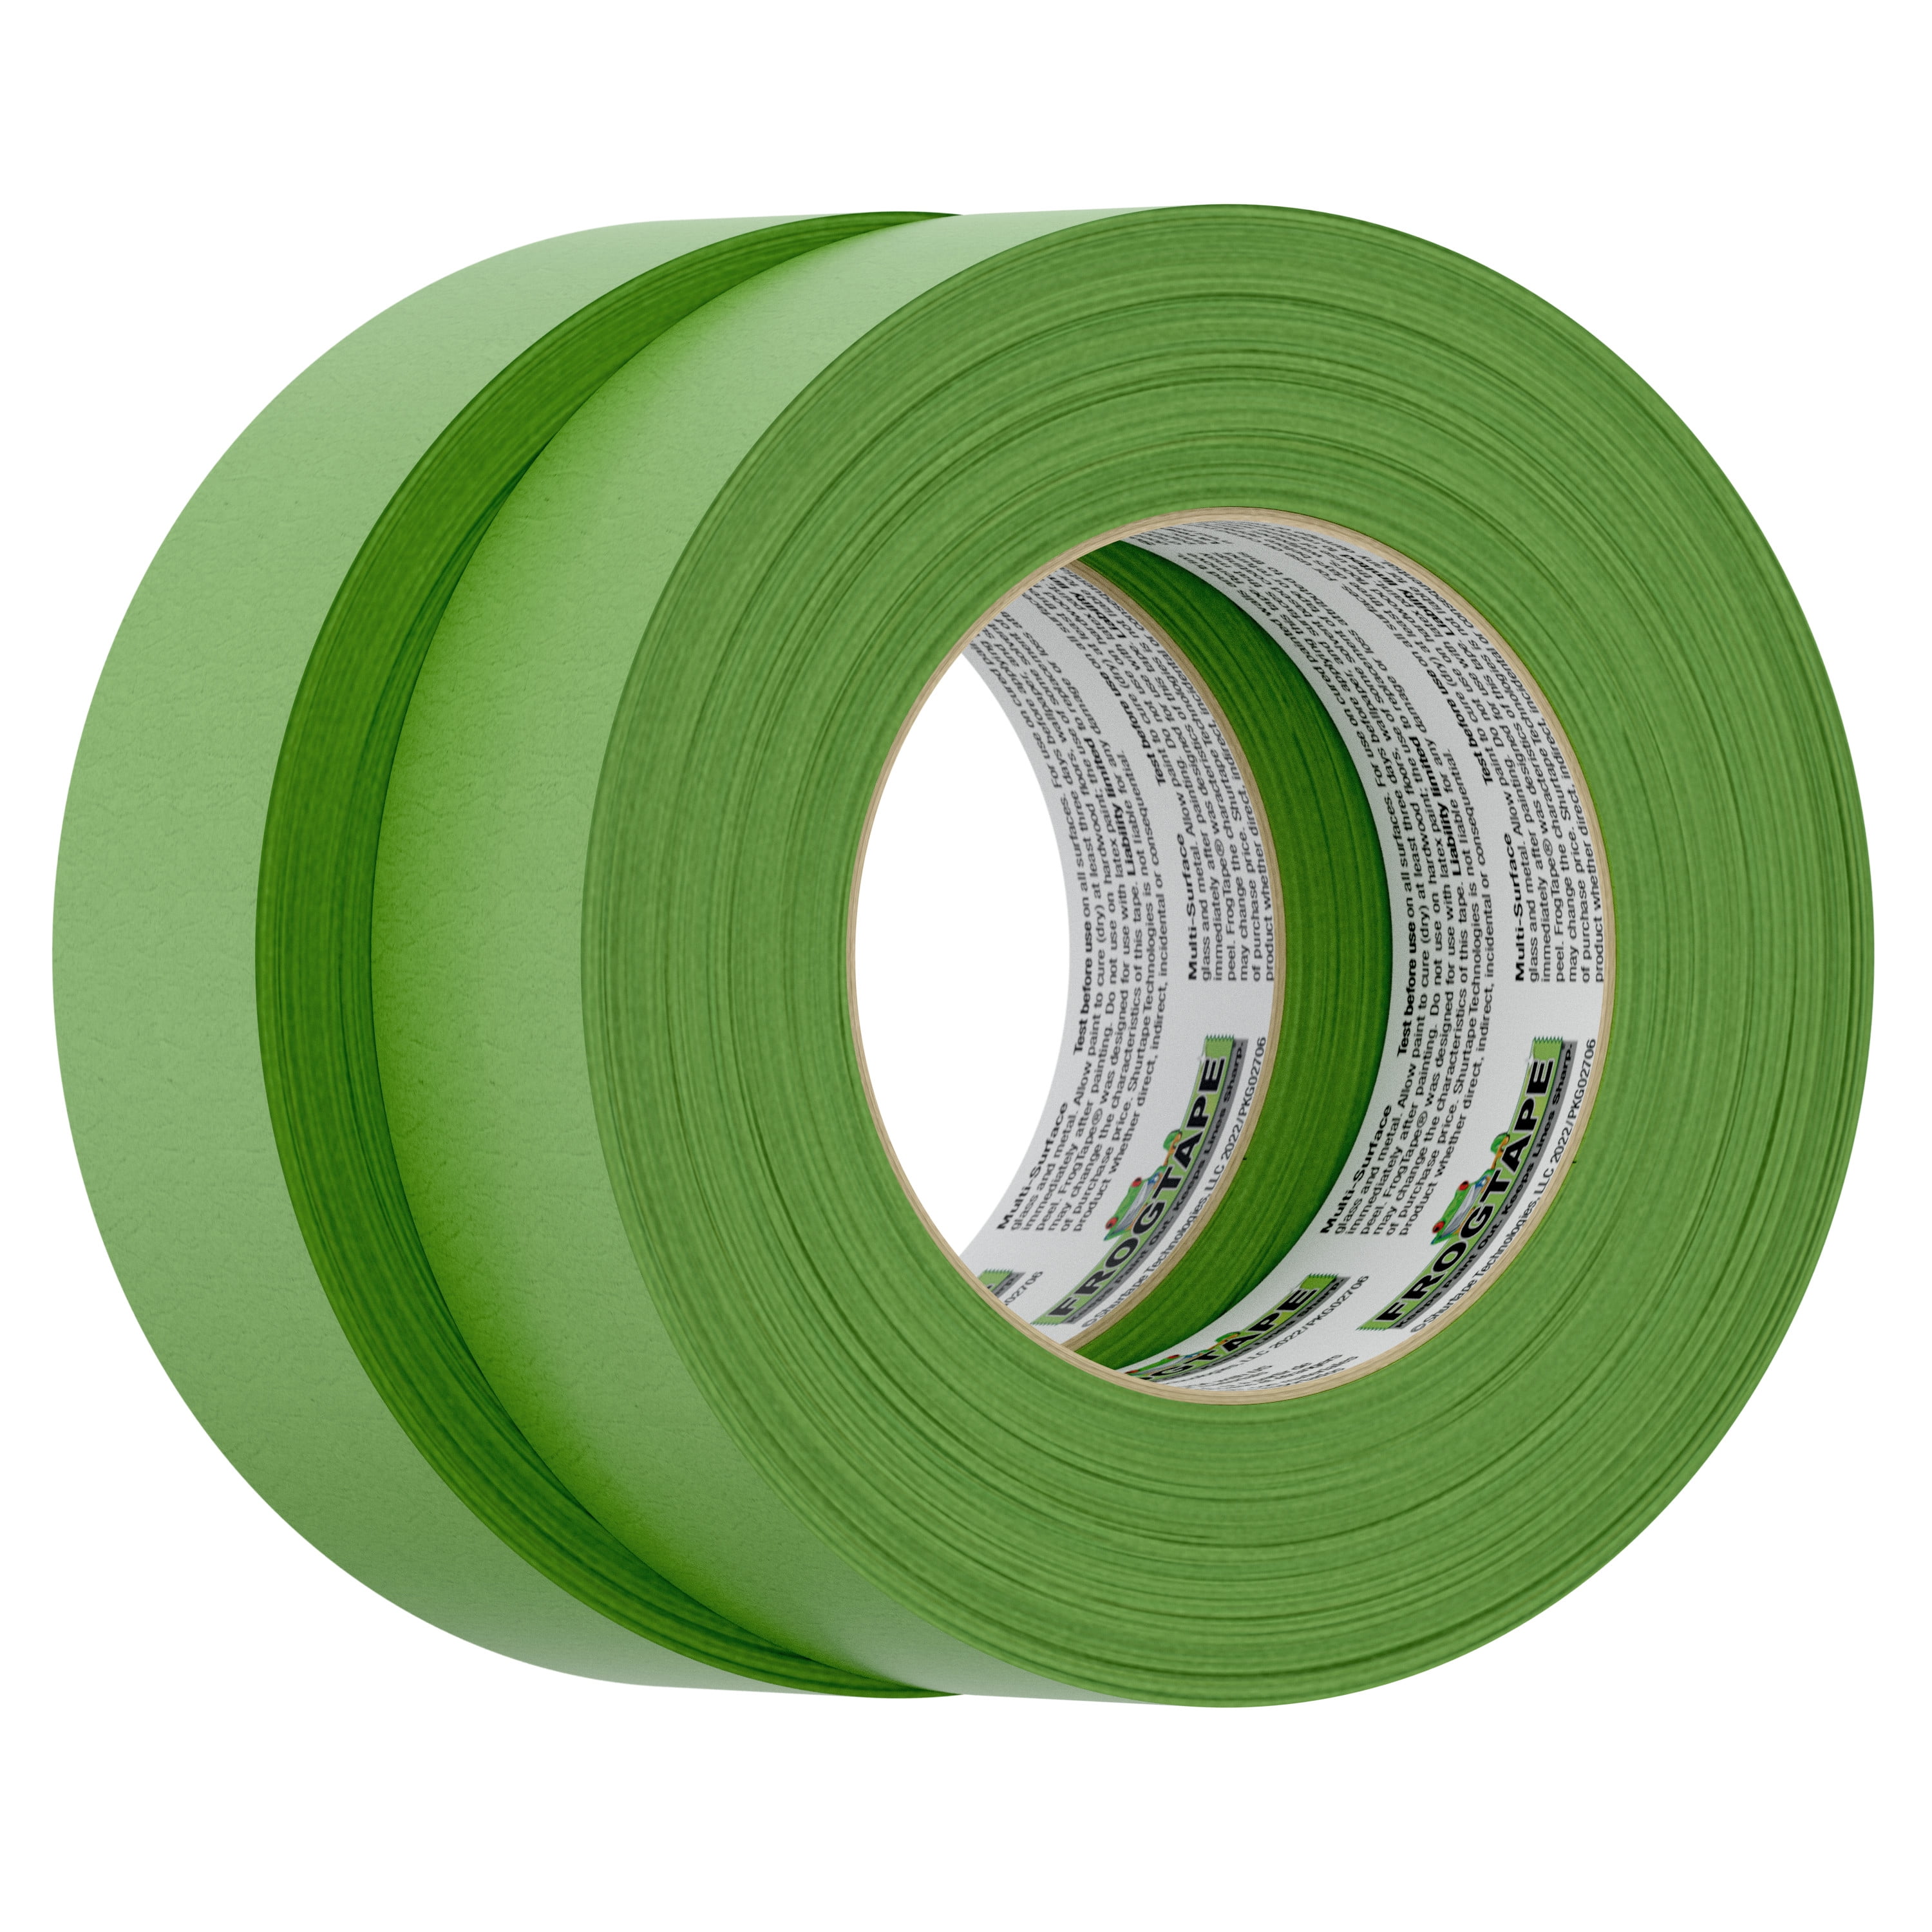 2 inch x 60 yard STIKK Forest Green Painters Tape 14 Day Easy